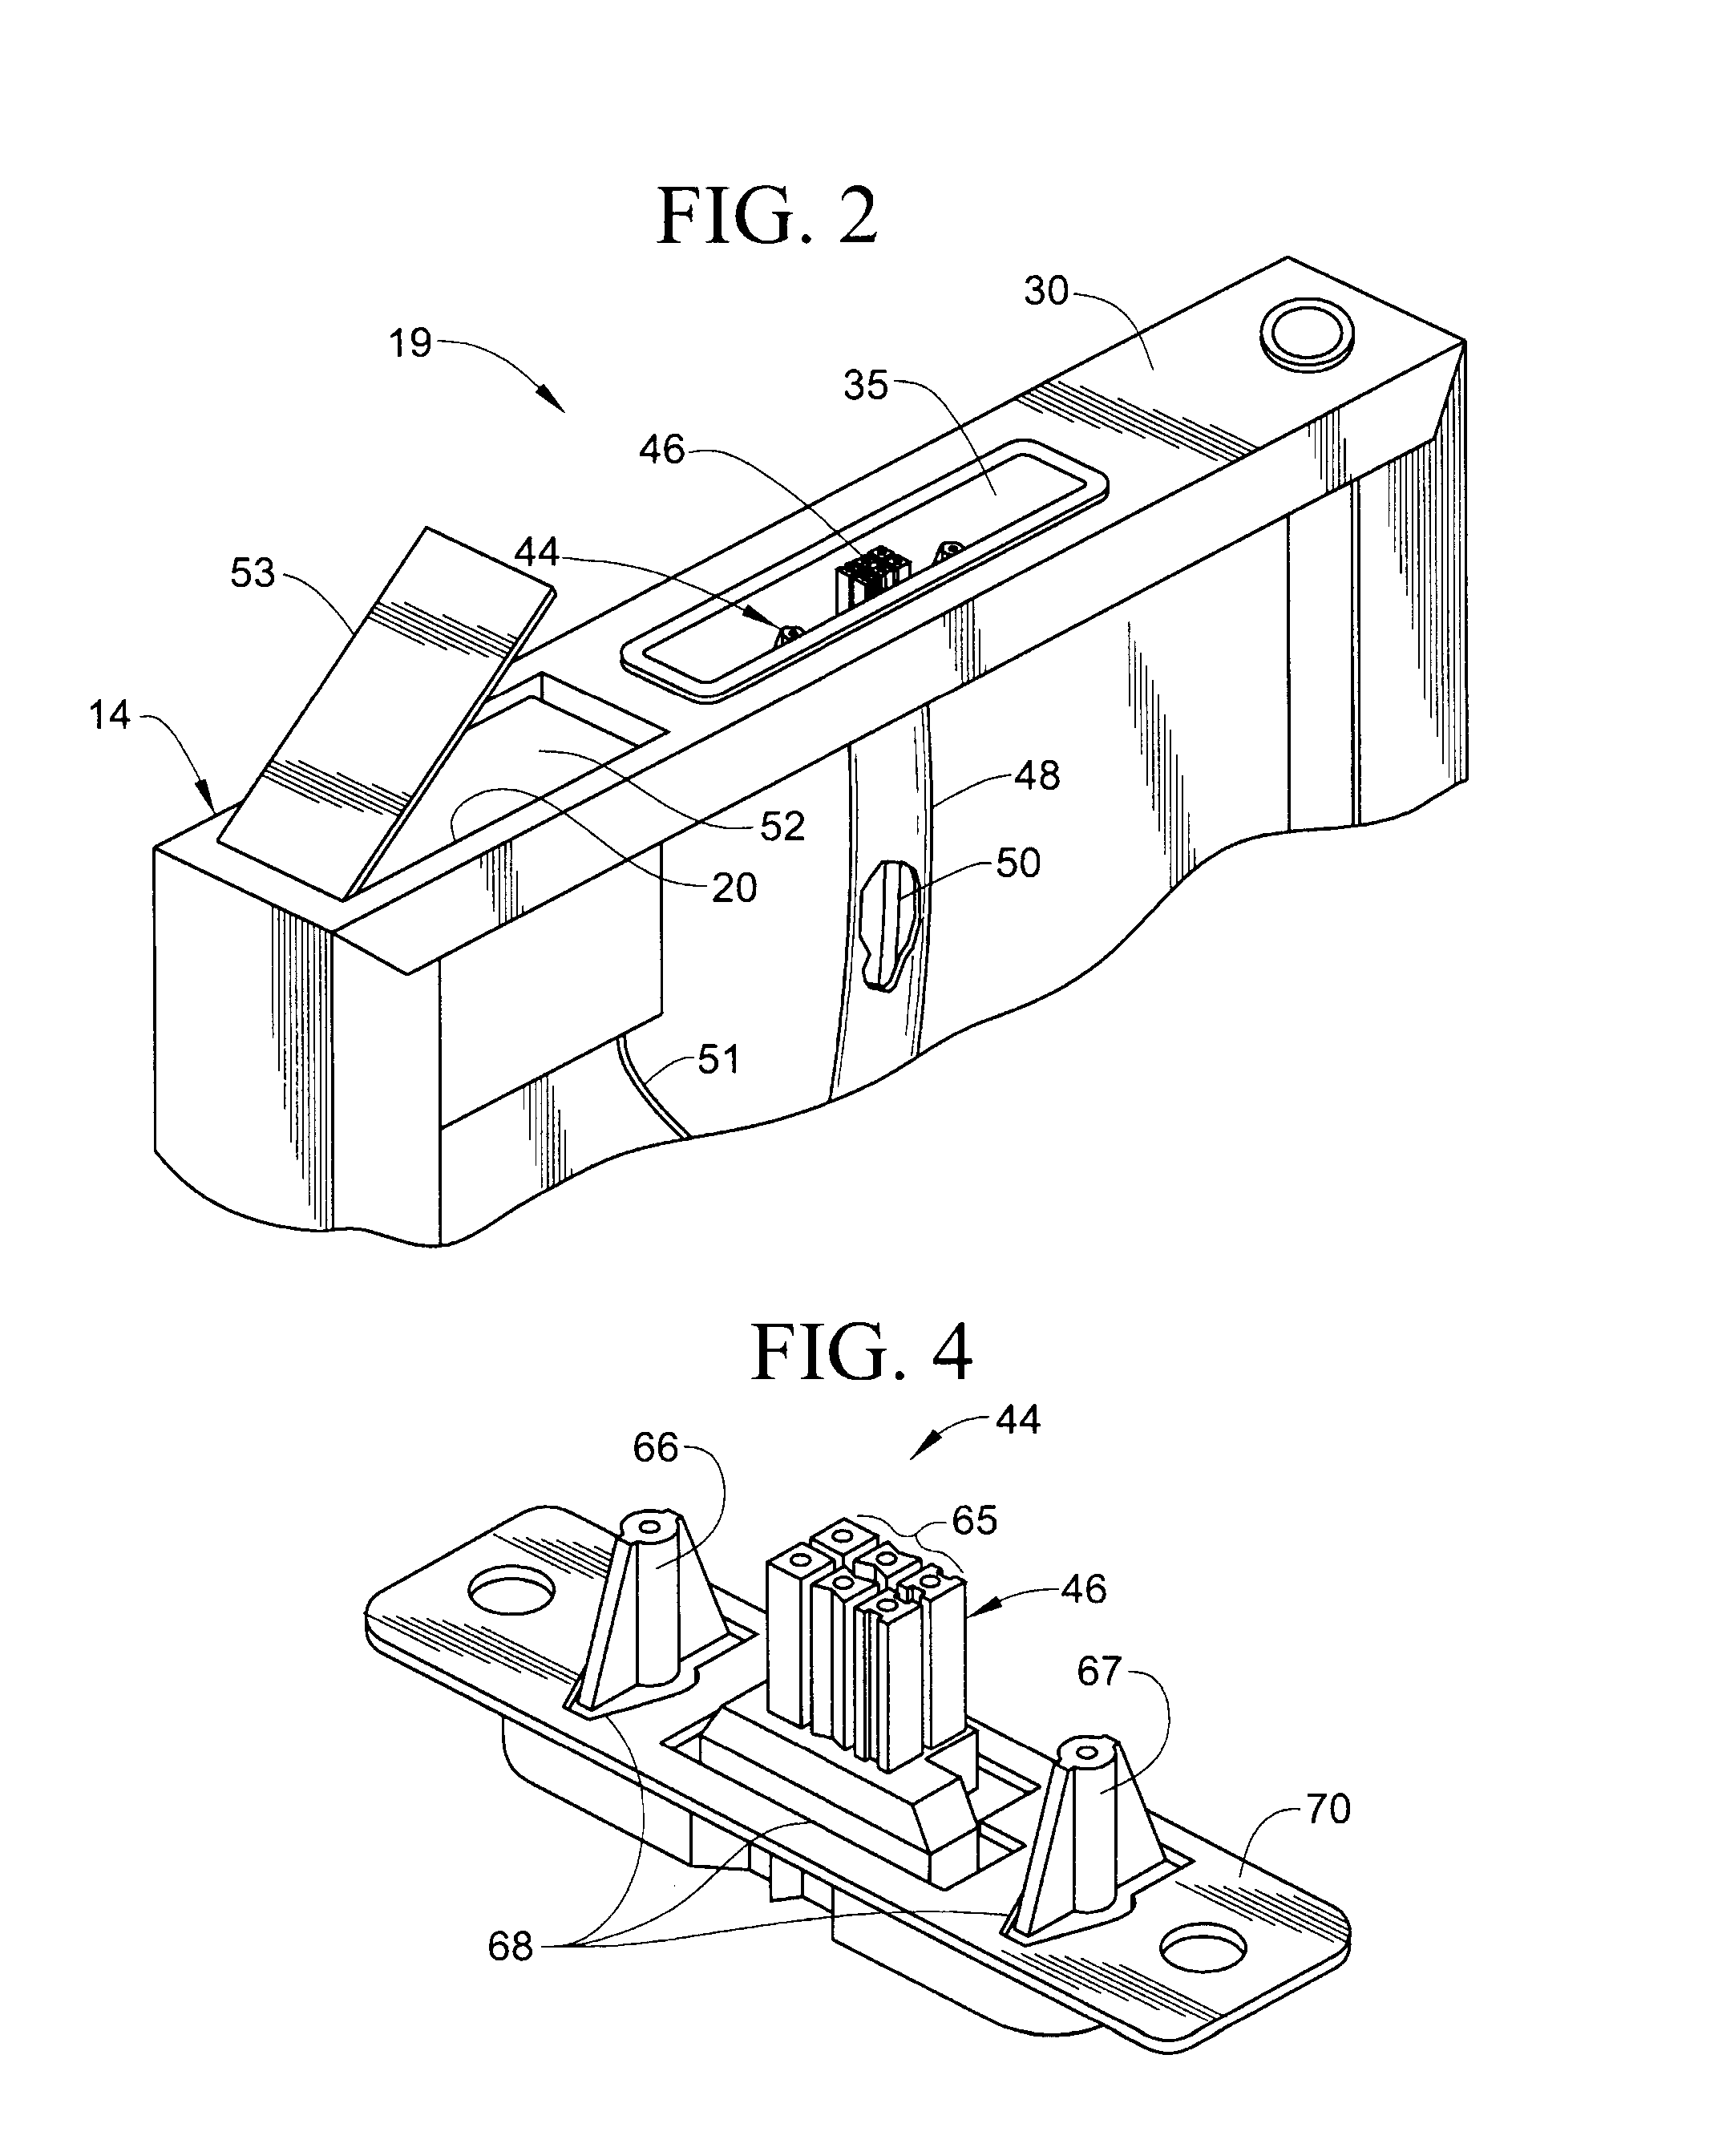 Refrigerator with plug-in power supply